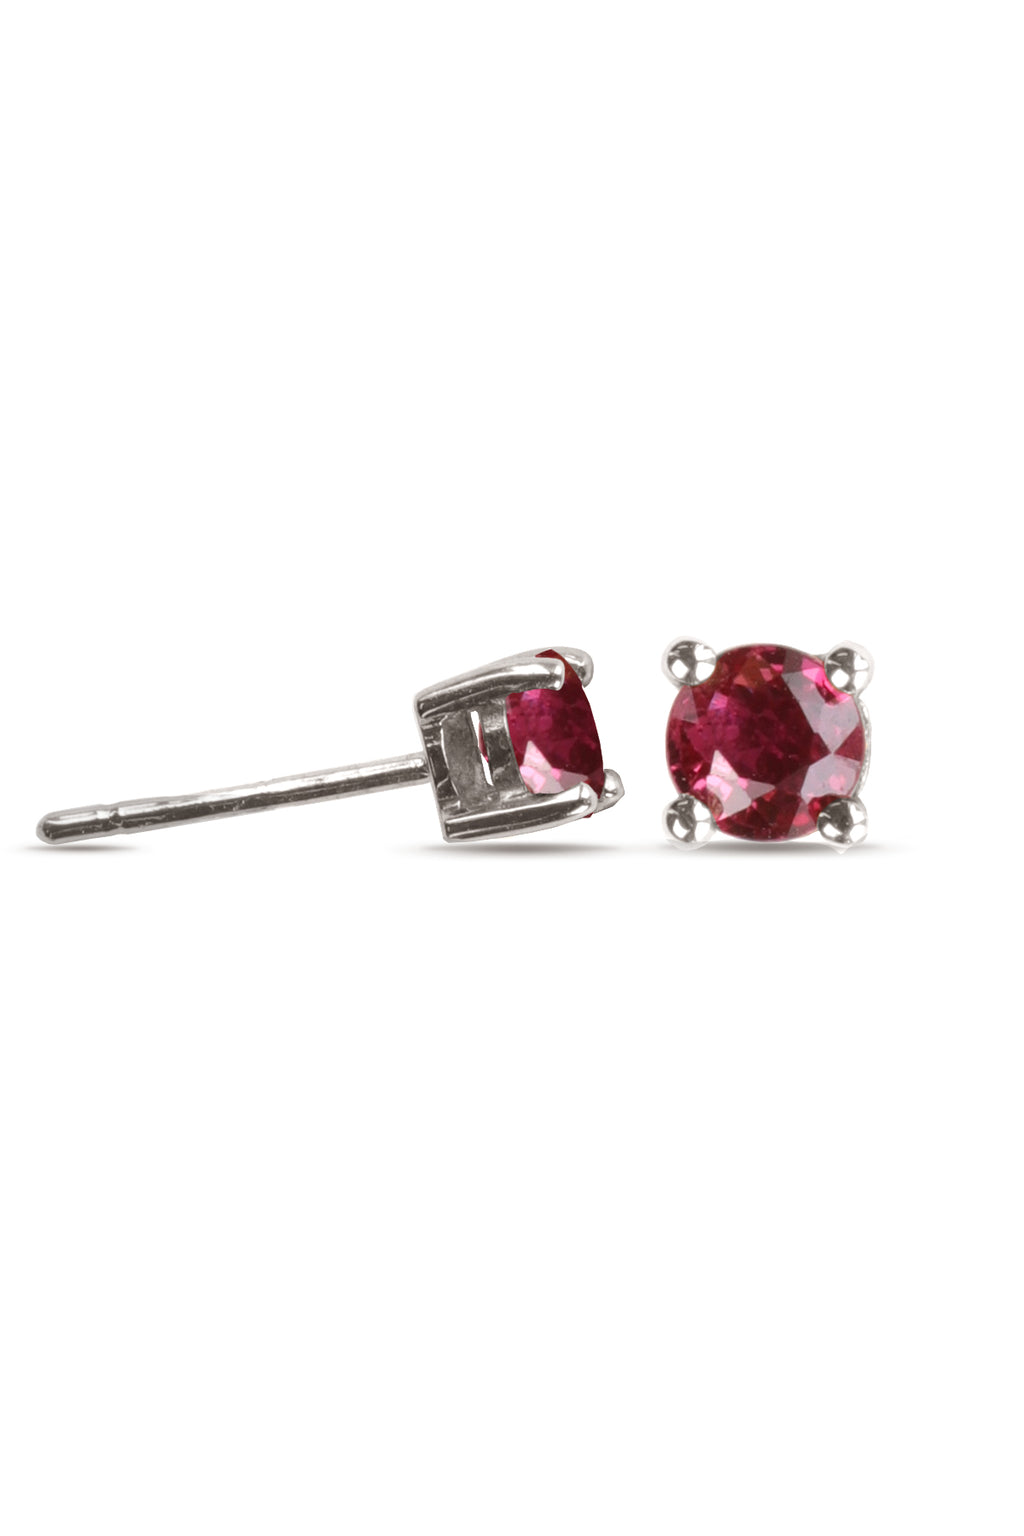 9ct White Gold Ruby Stud Earring